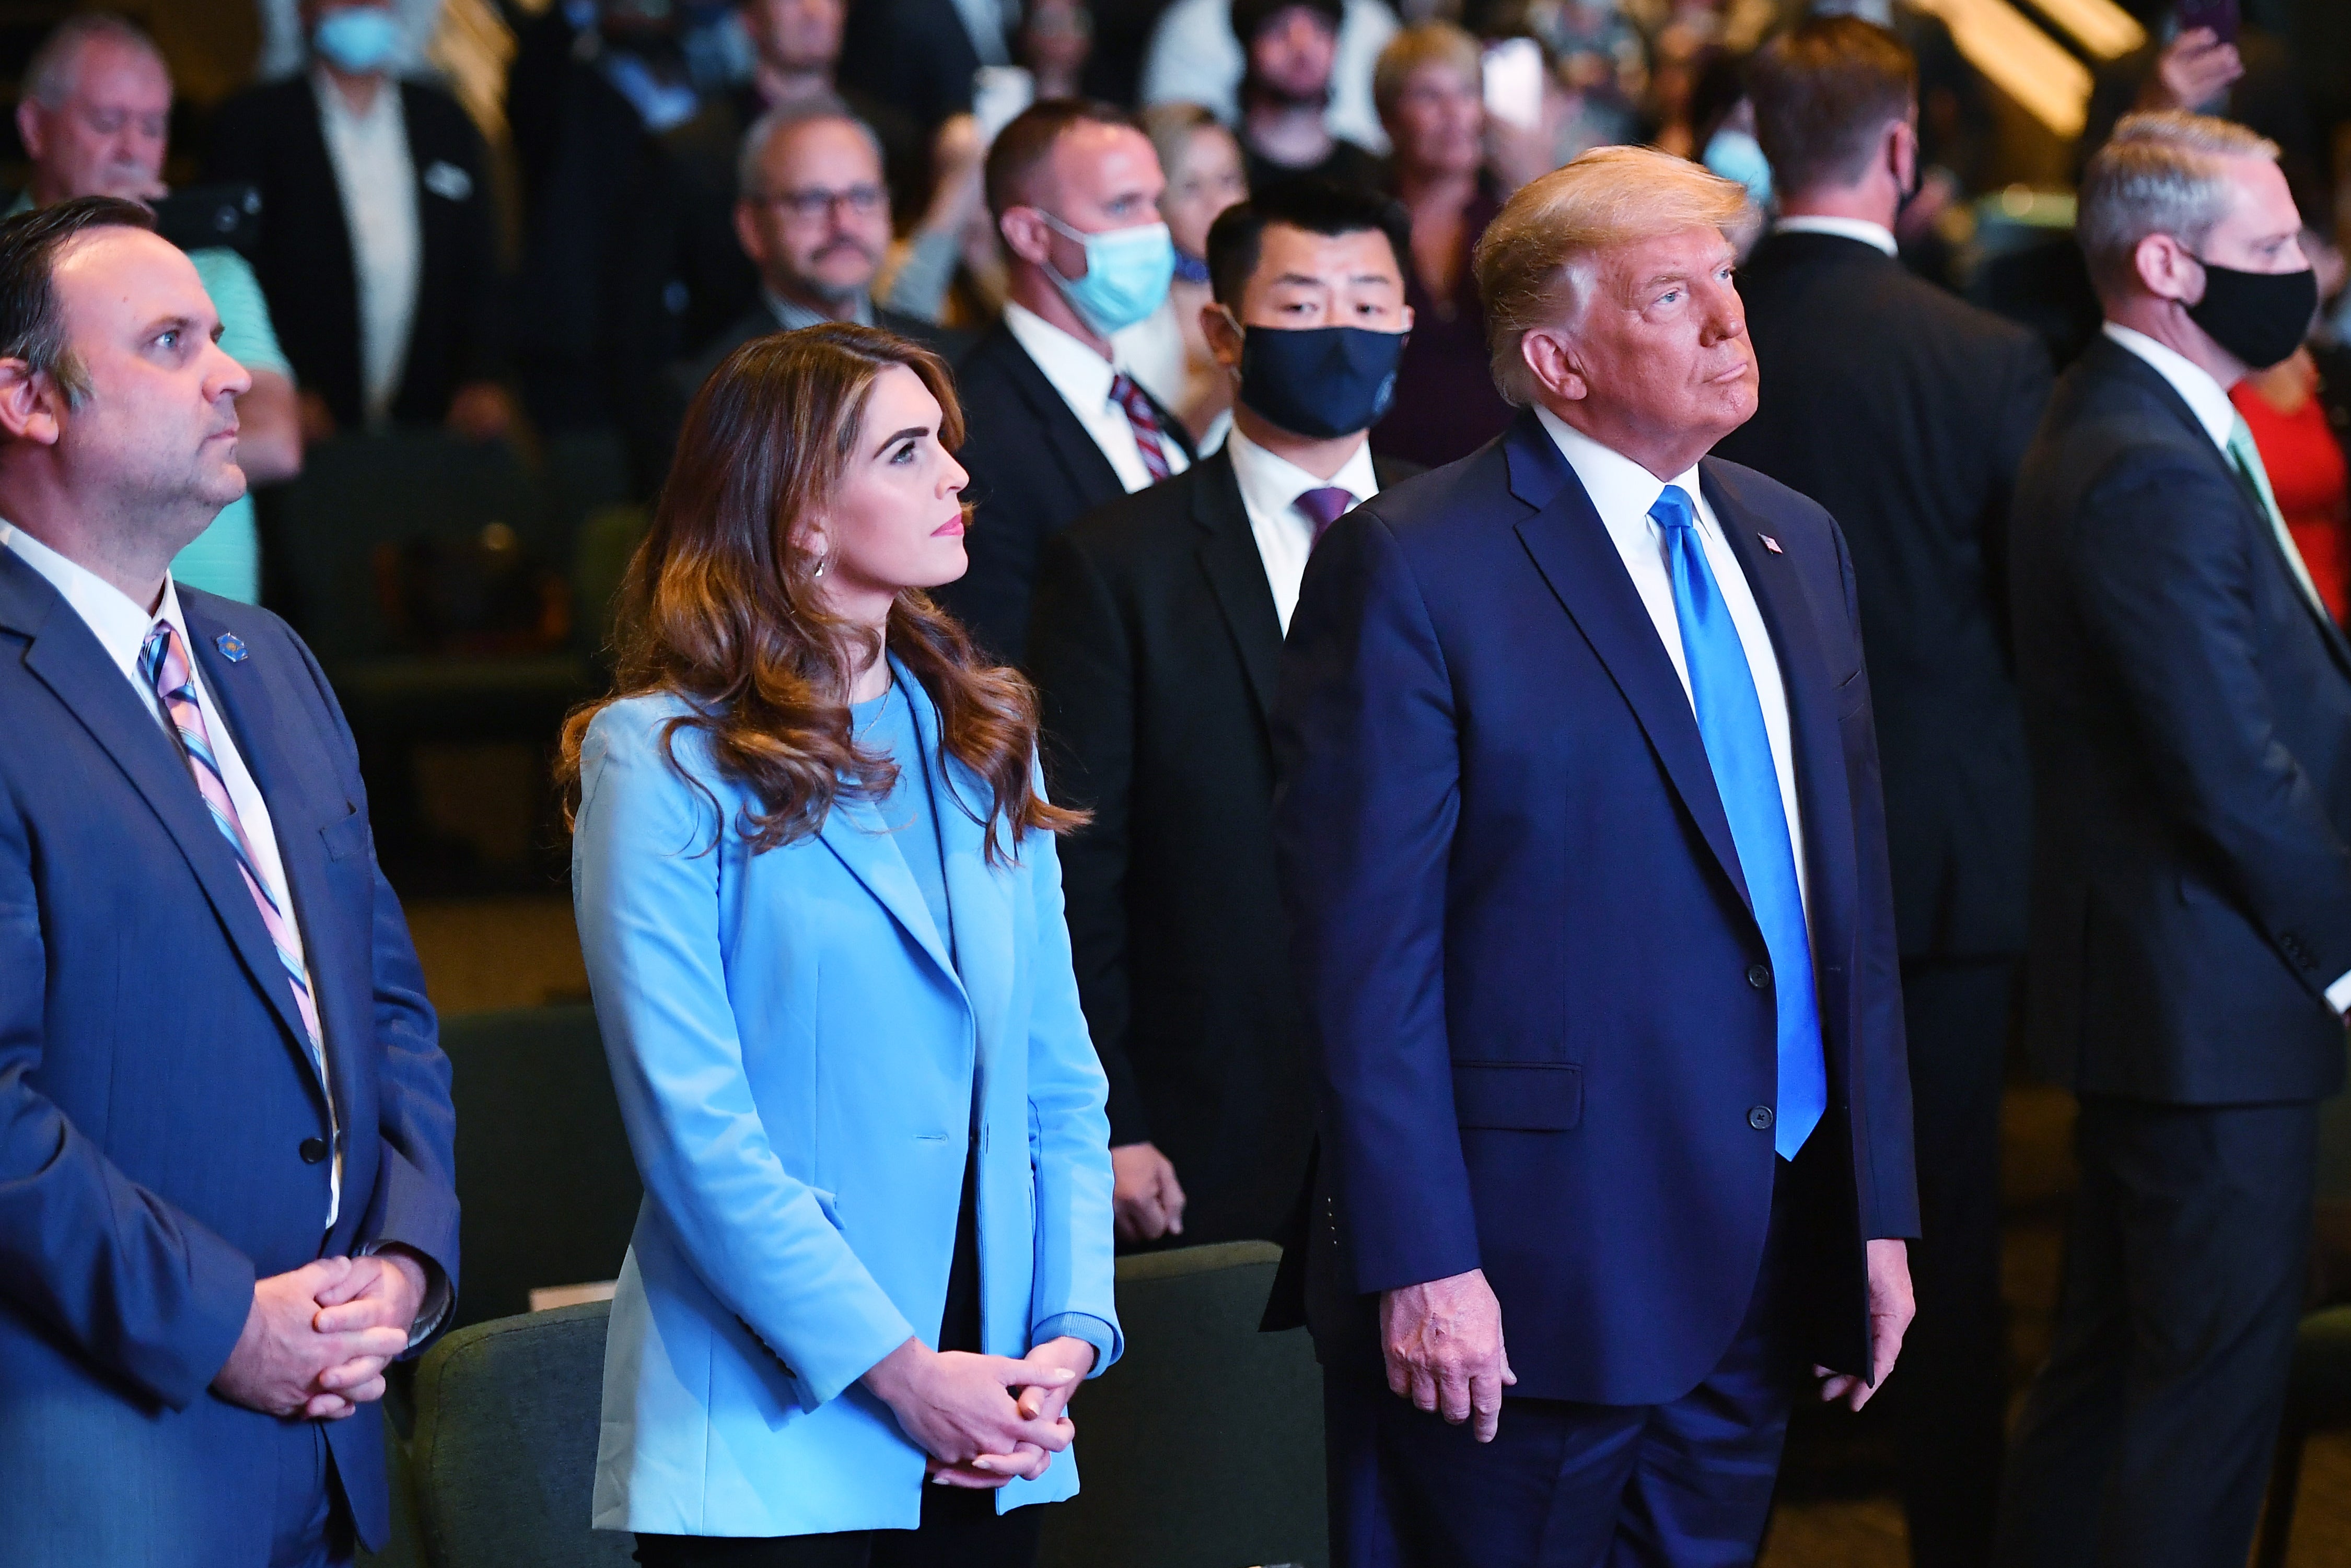 Hope Hicks, senior adviser to the president, and White House Deputy Chief of Staff for Communications Dan Scavino(L) attend services with US President Donald Trump at the International Church of Las Vegas in Las Vegas, Nevada, on October 18, 2020